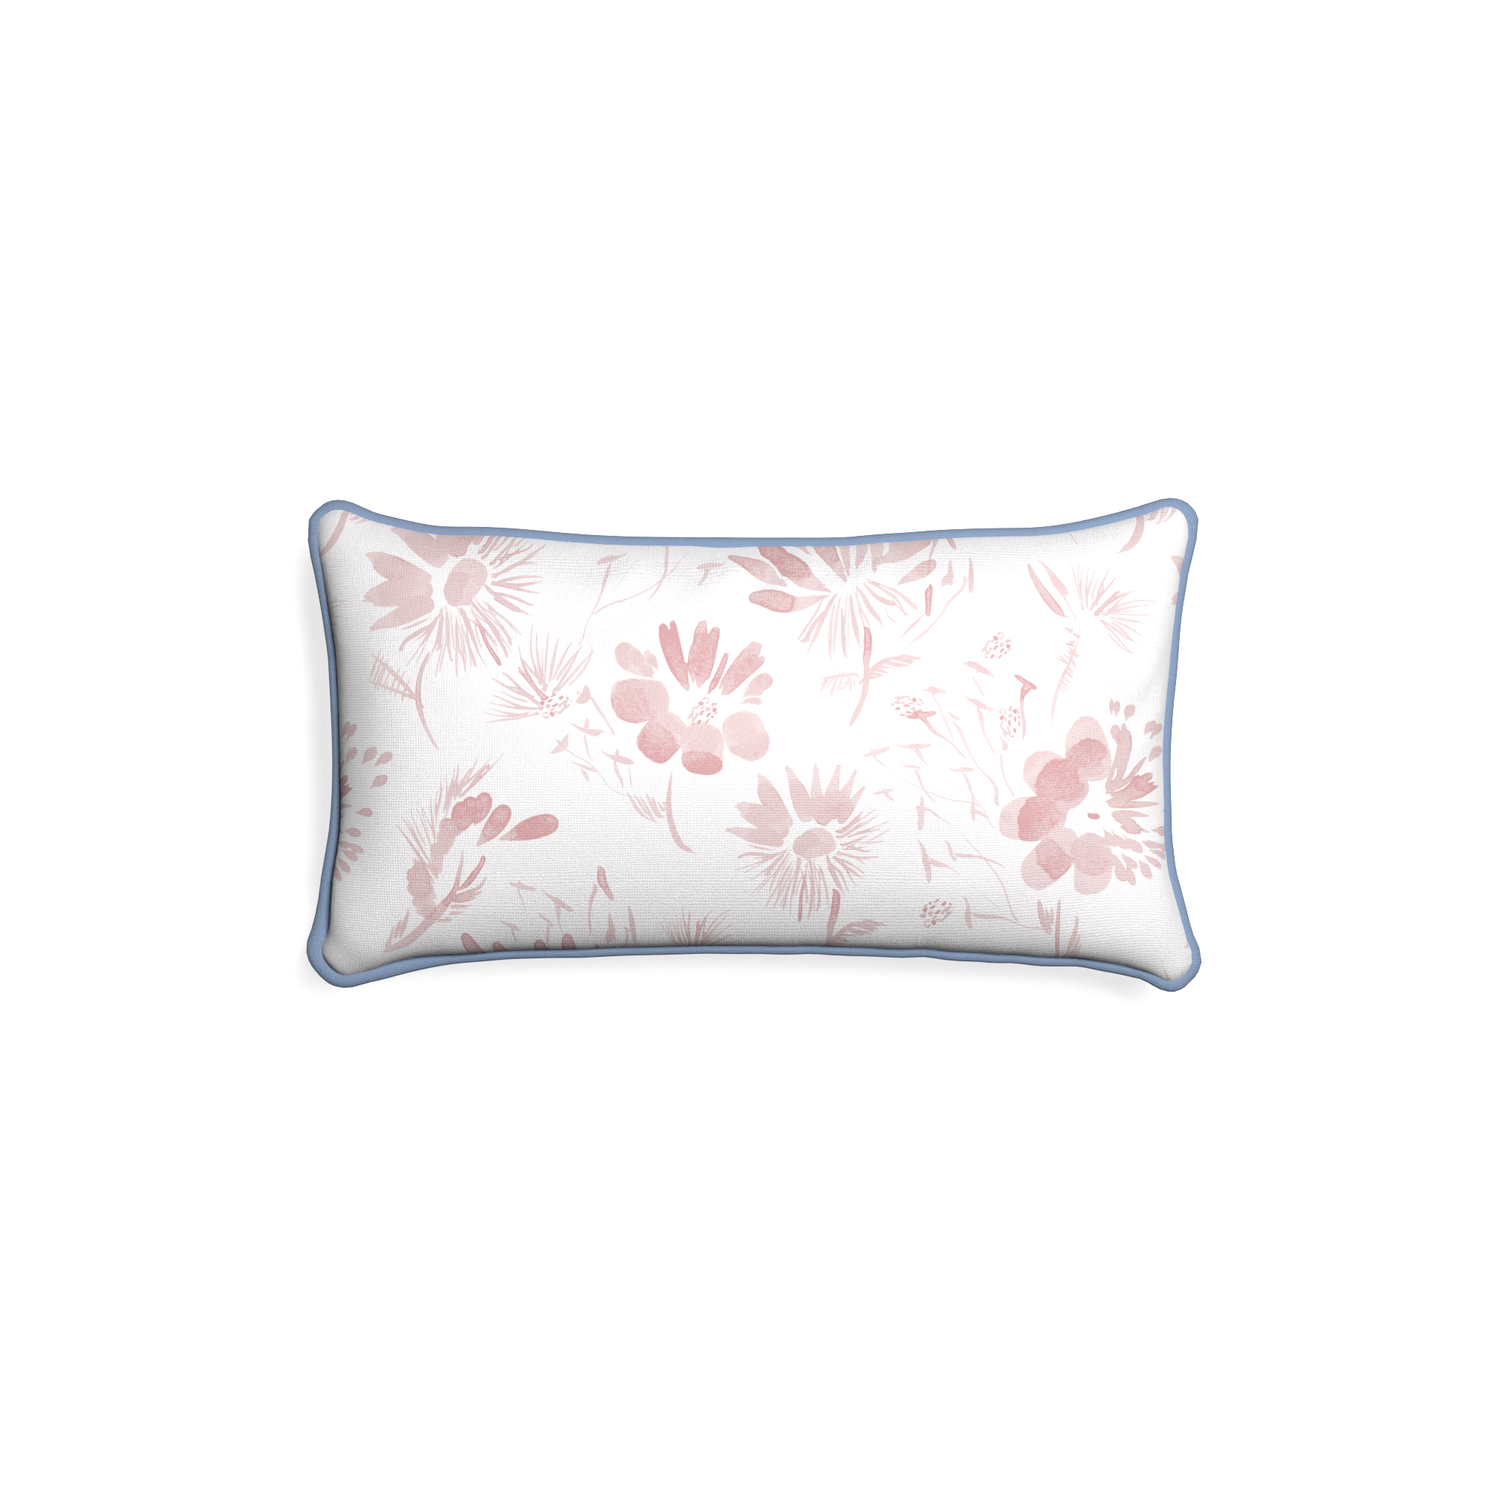 Petite-lumbar blake custom pink floralpillow with sky piping on white background